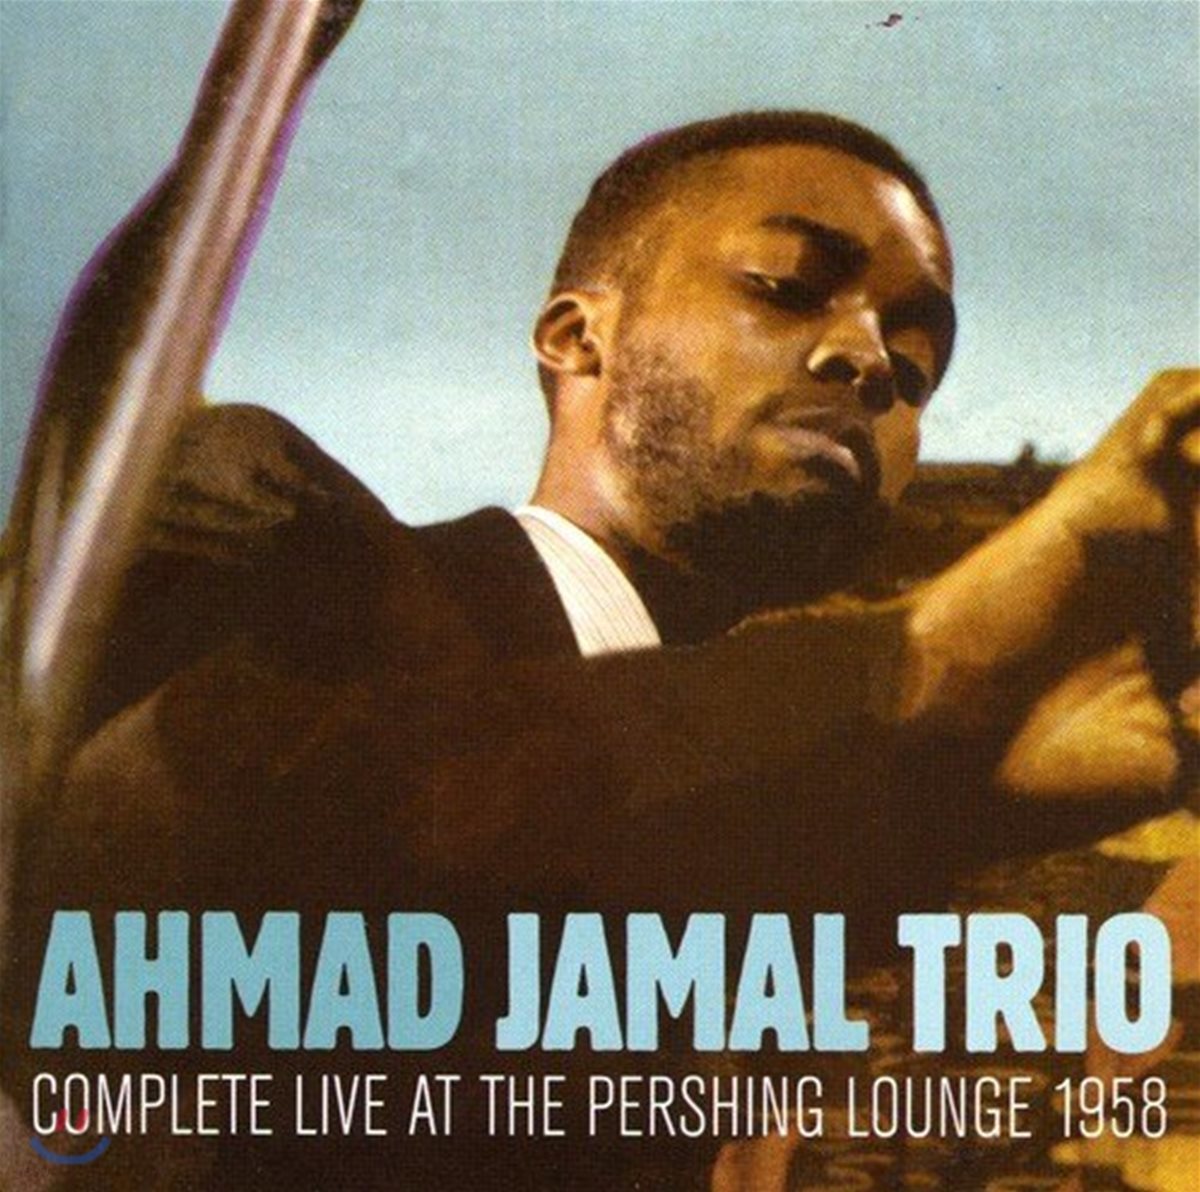 Ahmad Jamal Trio - Complete Live At The Pershing Lounge 1958